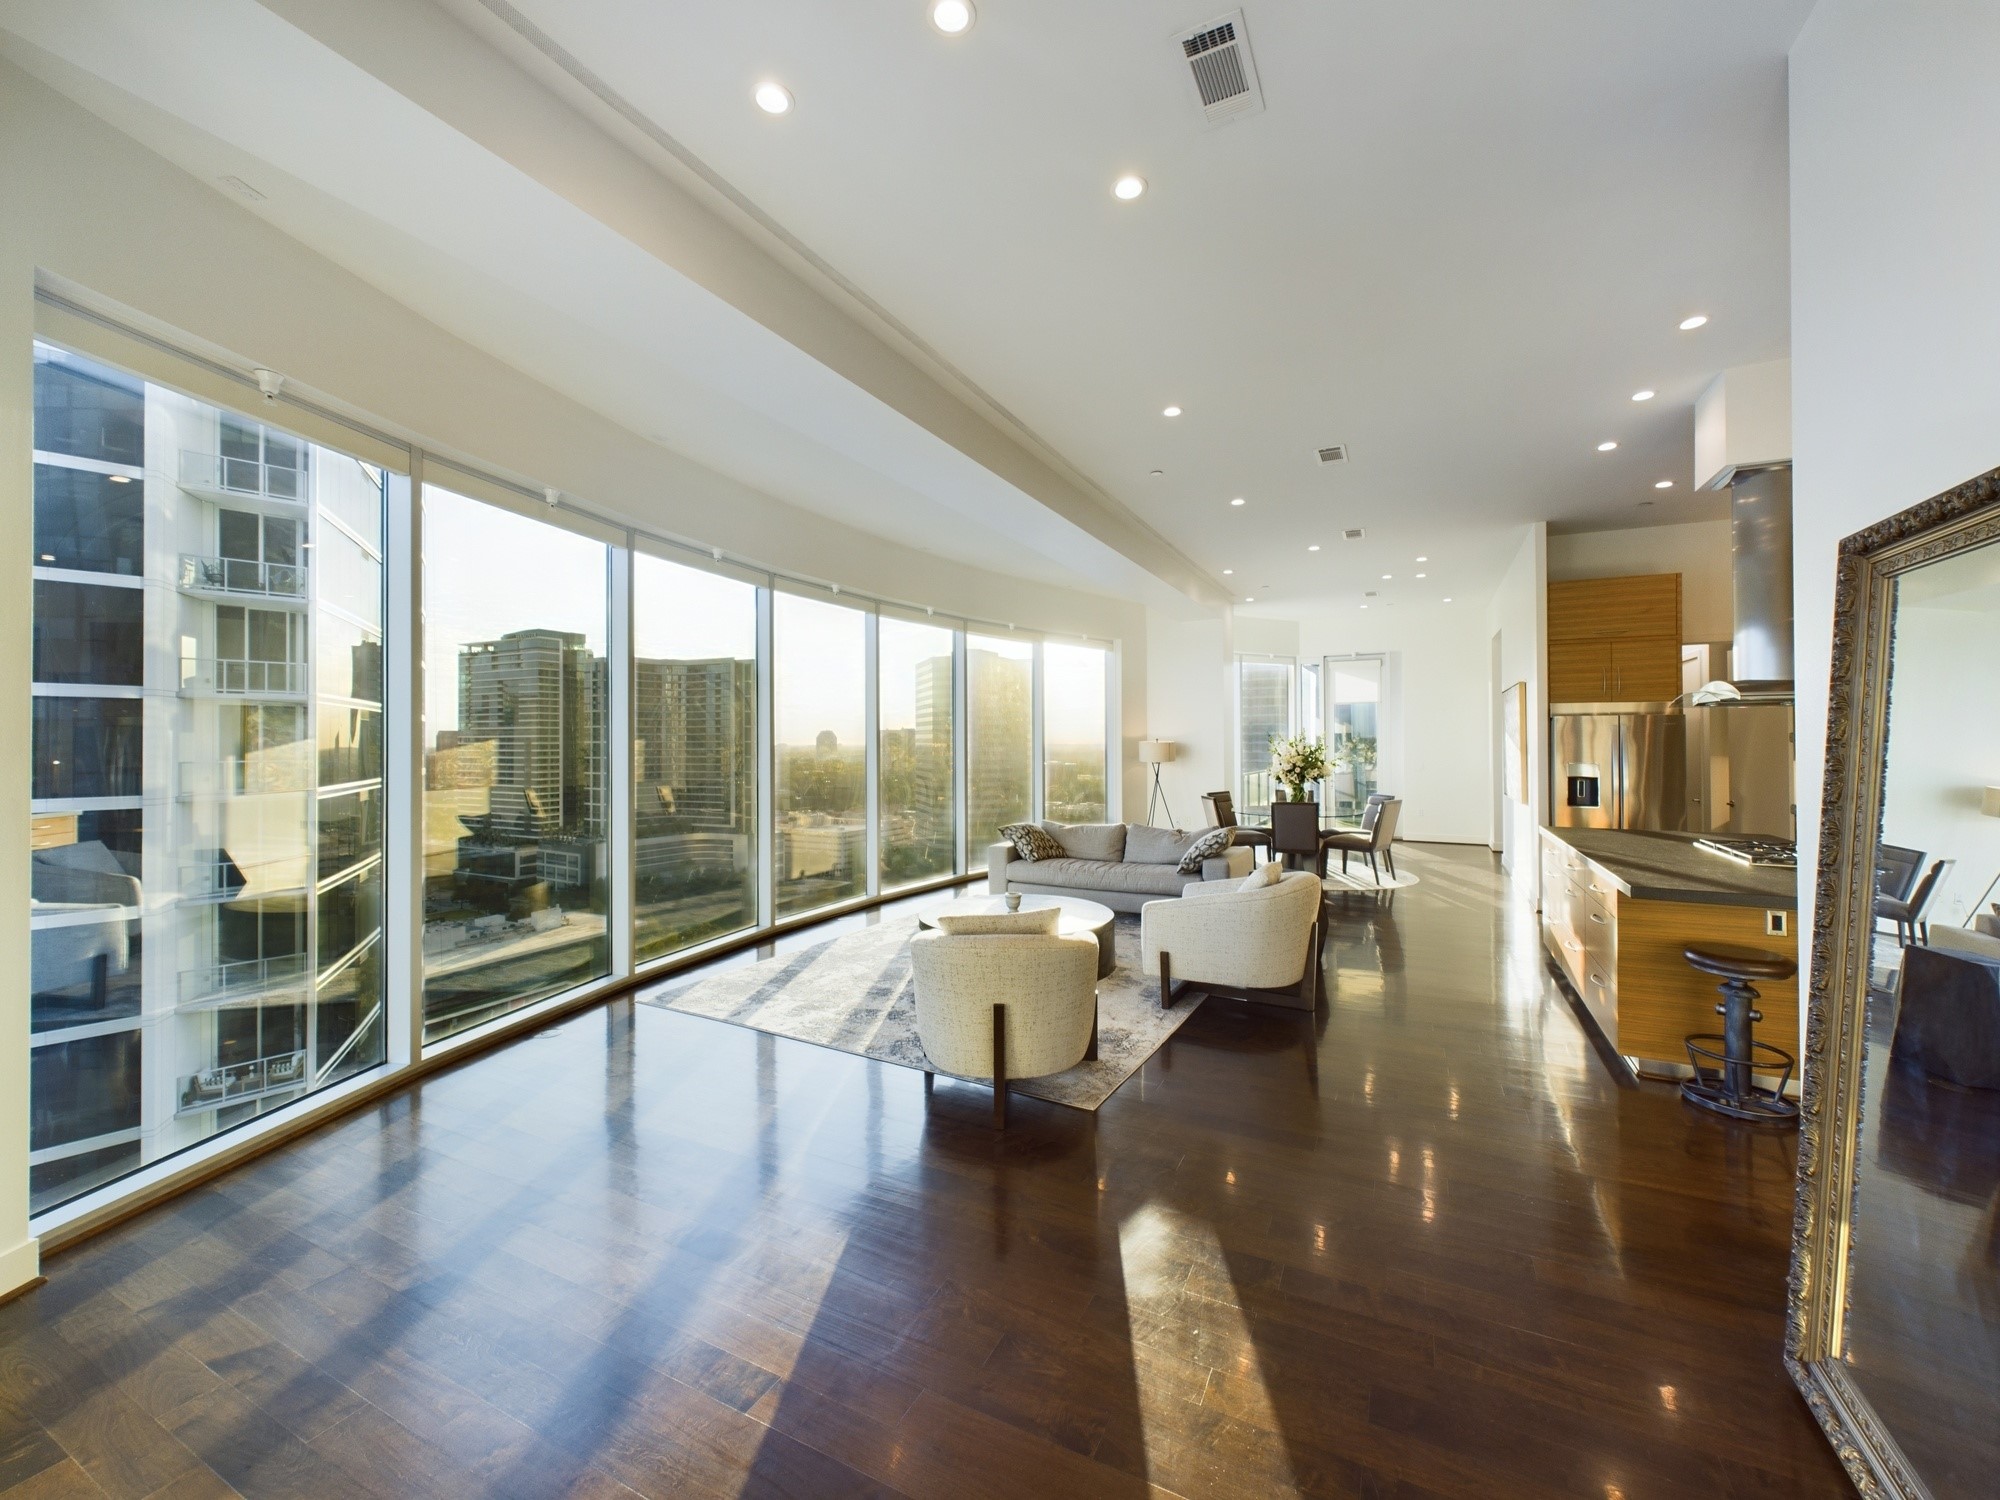 Sweeping Views from the Main Living Area